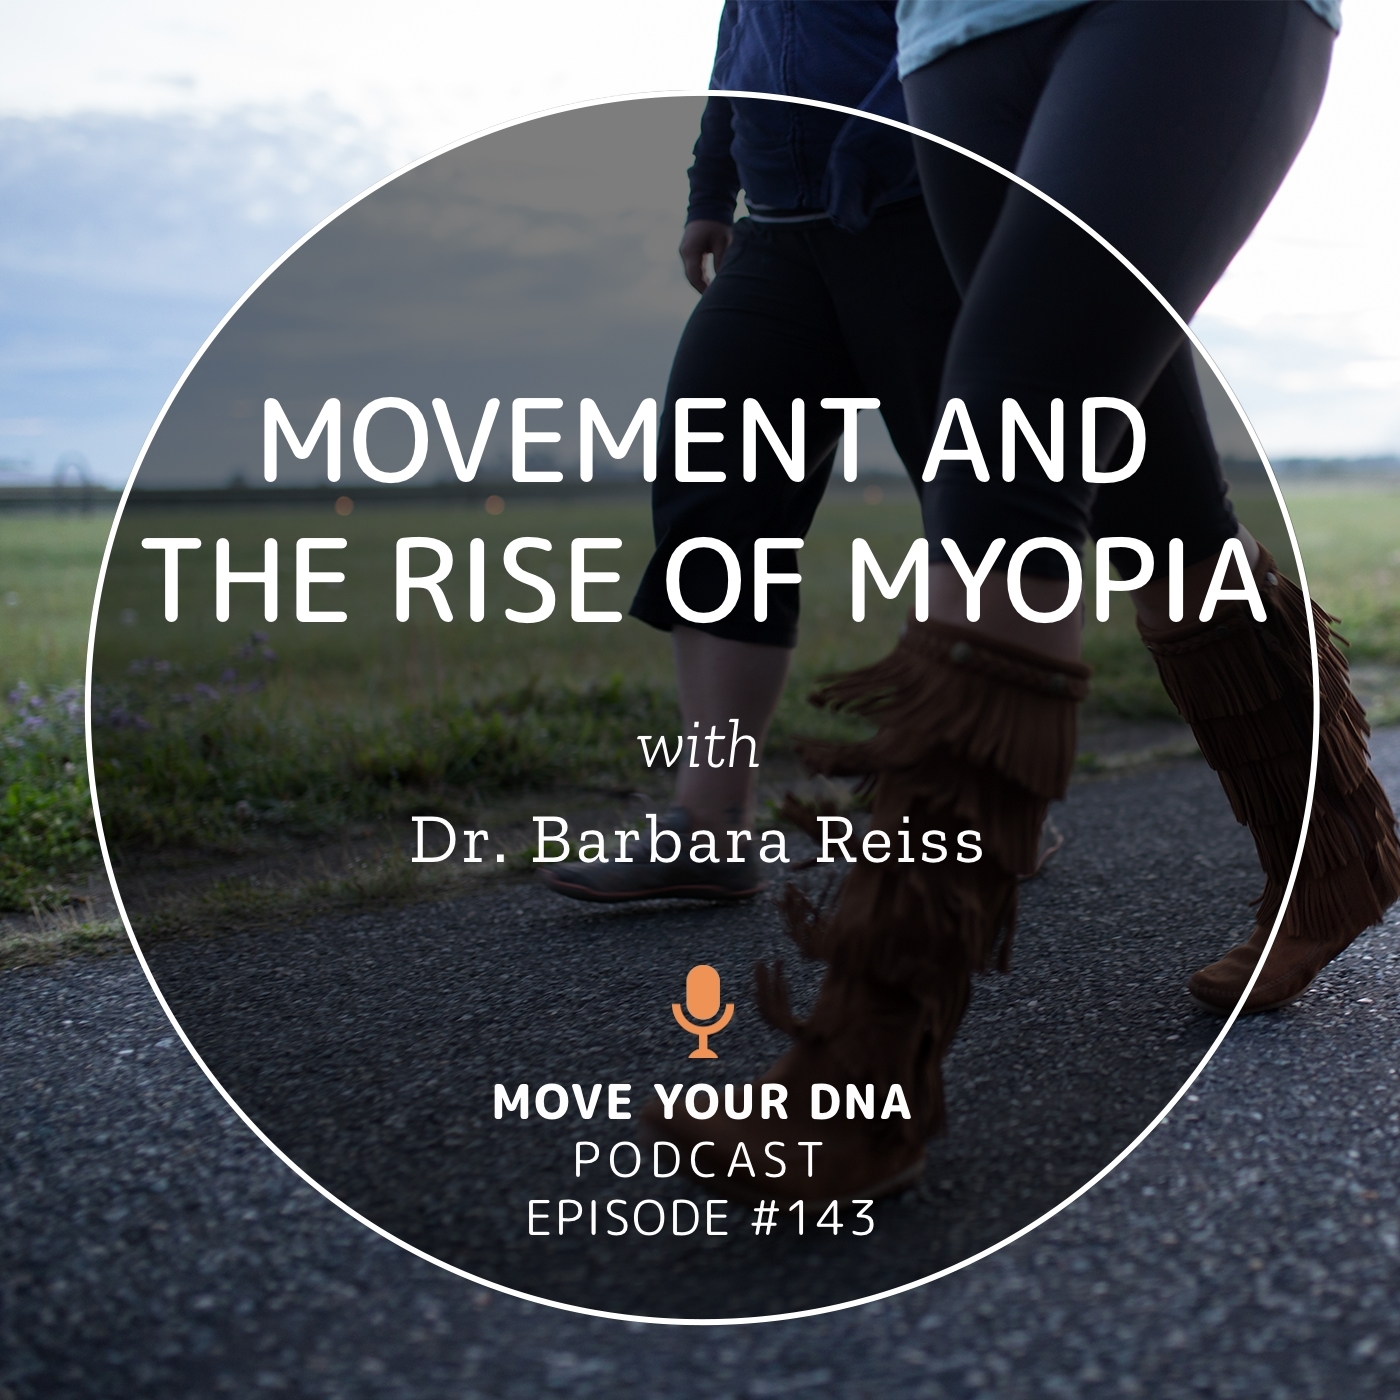 Move Your DNA podcast episode #143